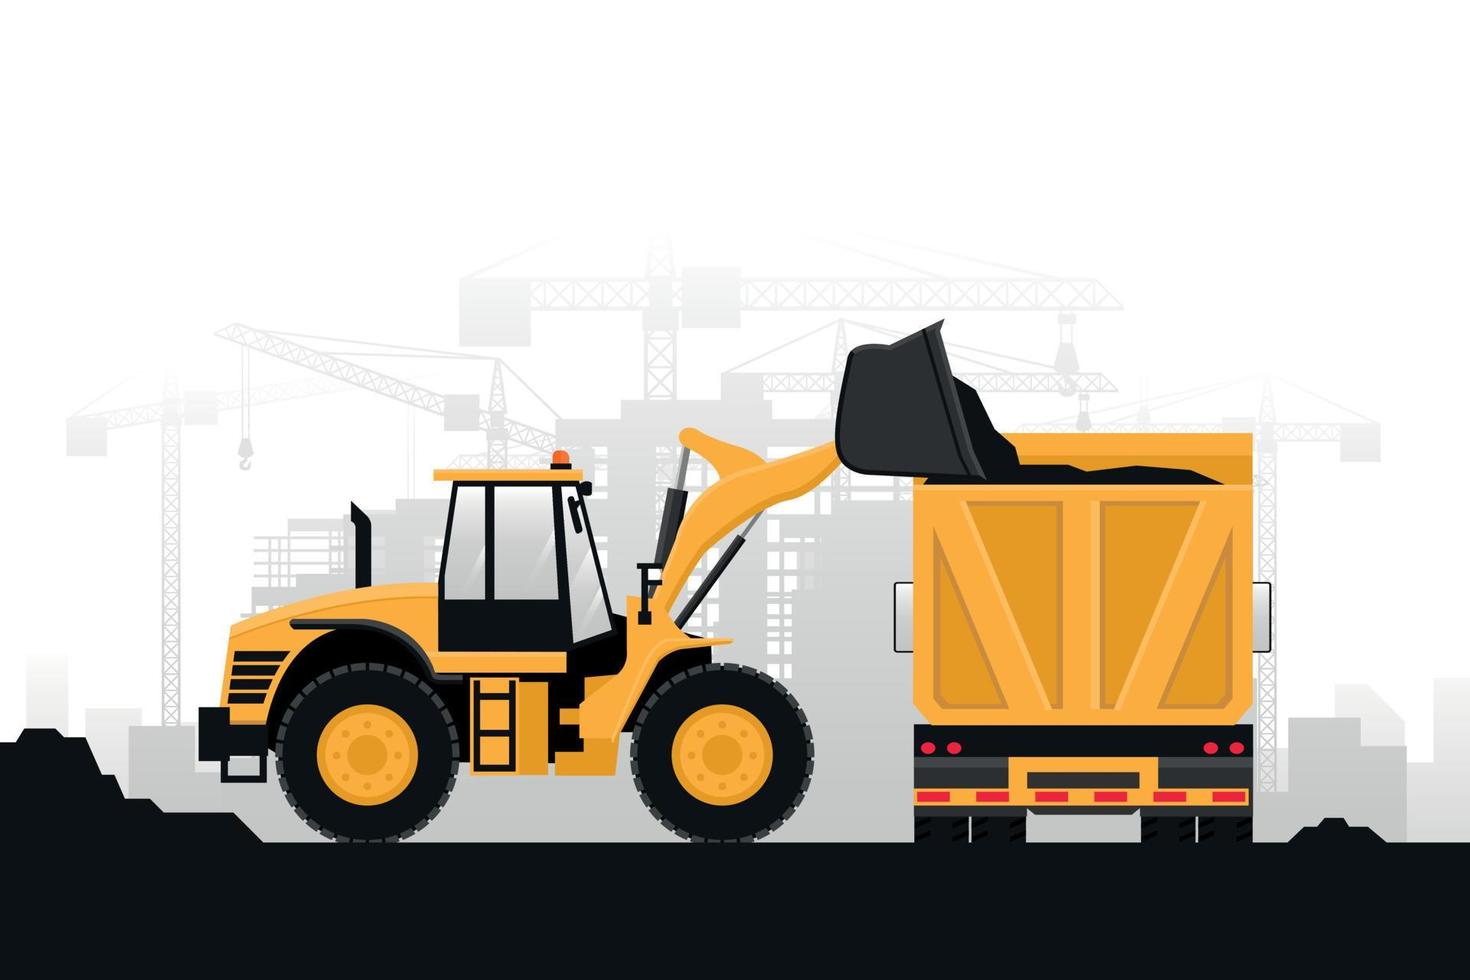 Background of heavy machinery in construction work with front loader and truck with rear view on gray background vector